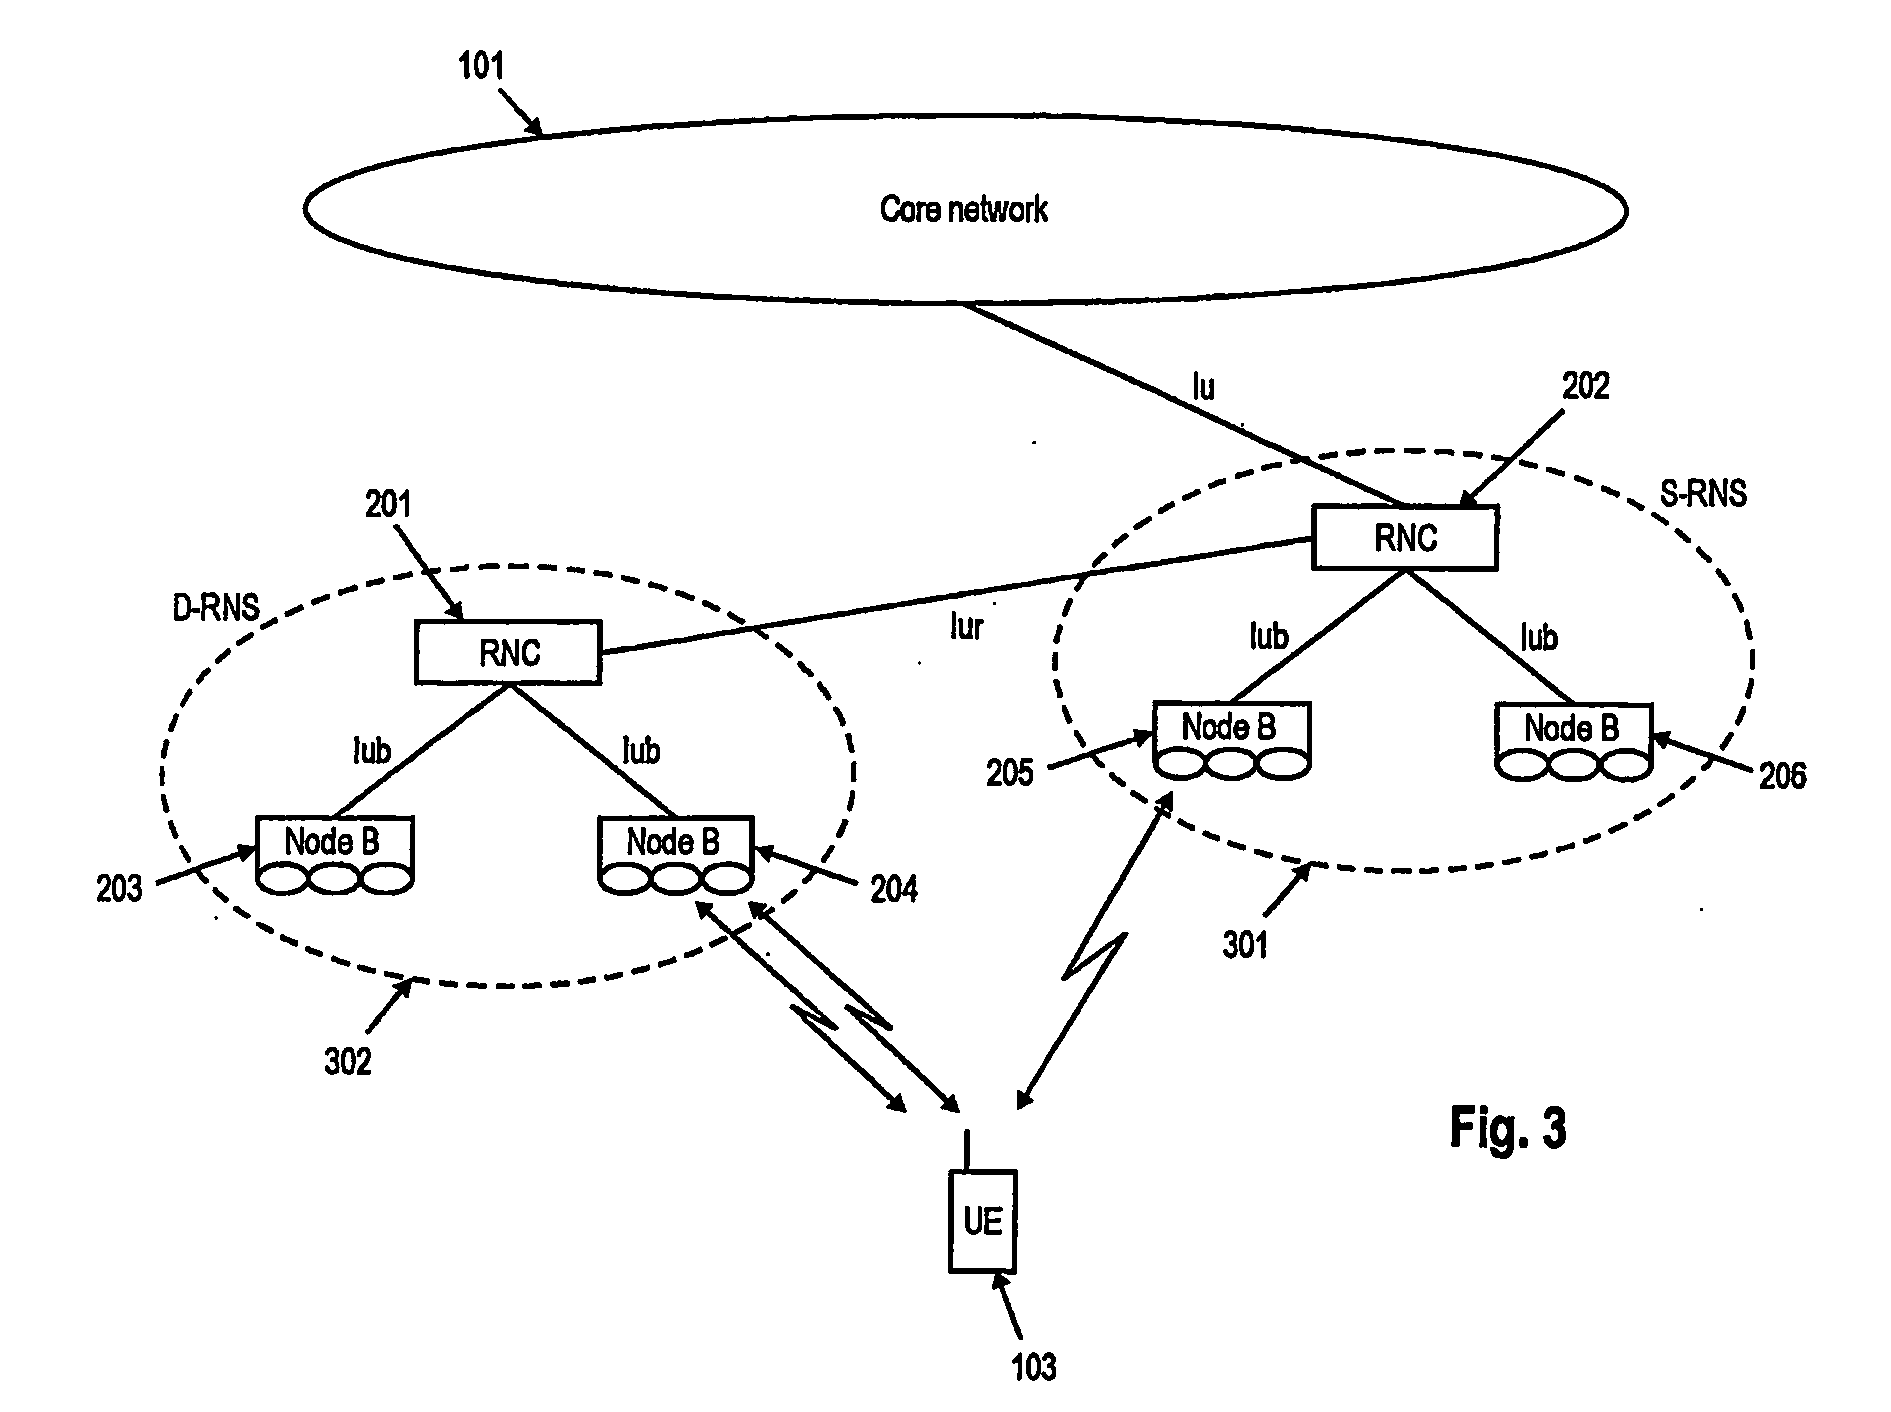 Quality-of-service (qos)-aware scheduling for uplink transmission on dedicated channels